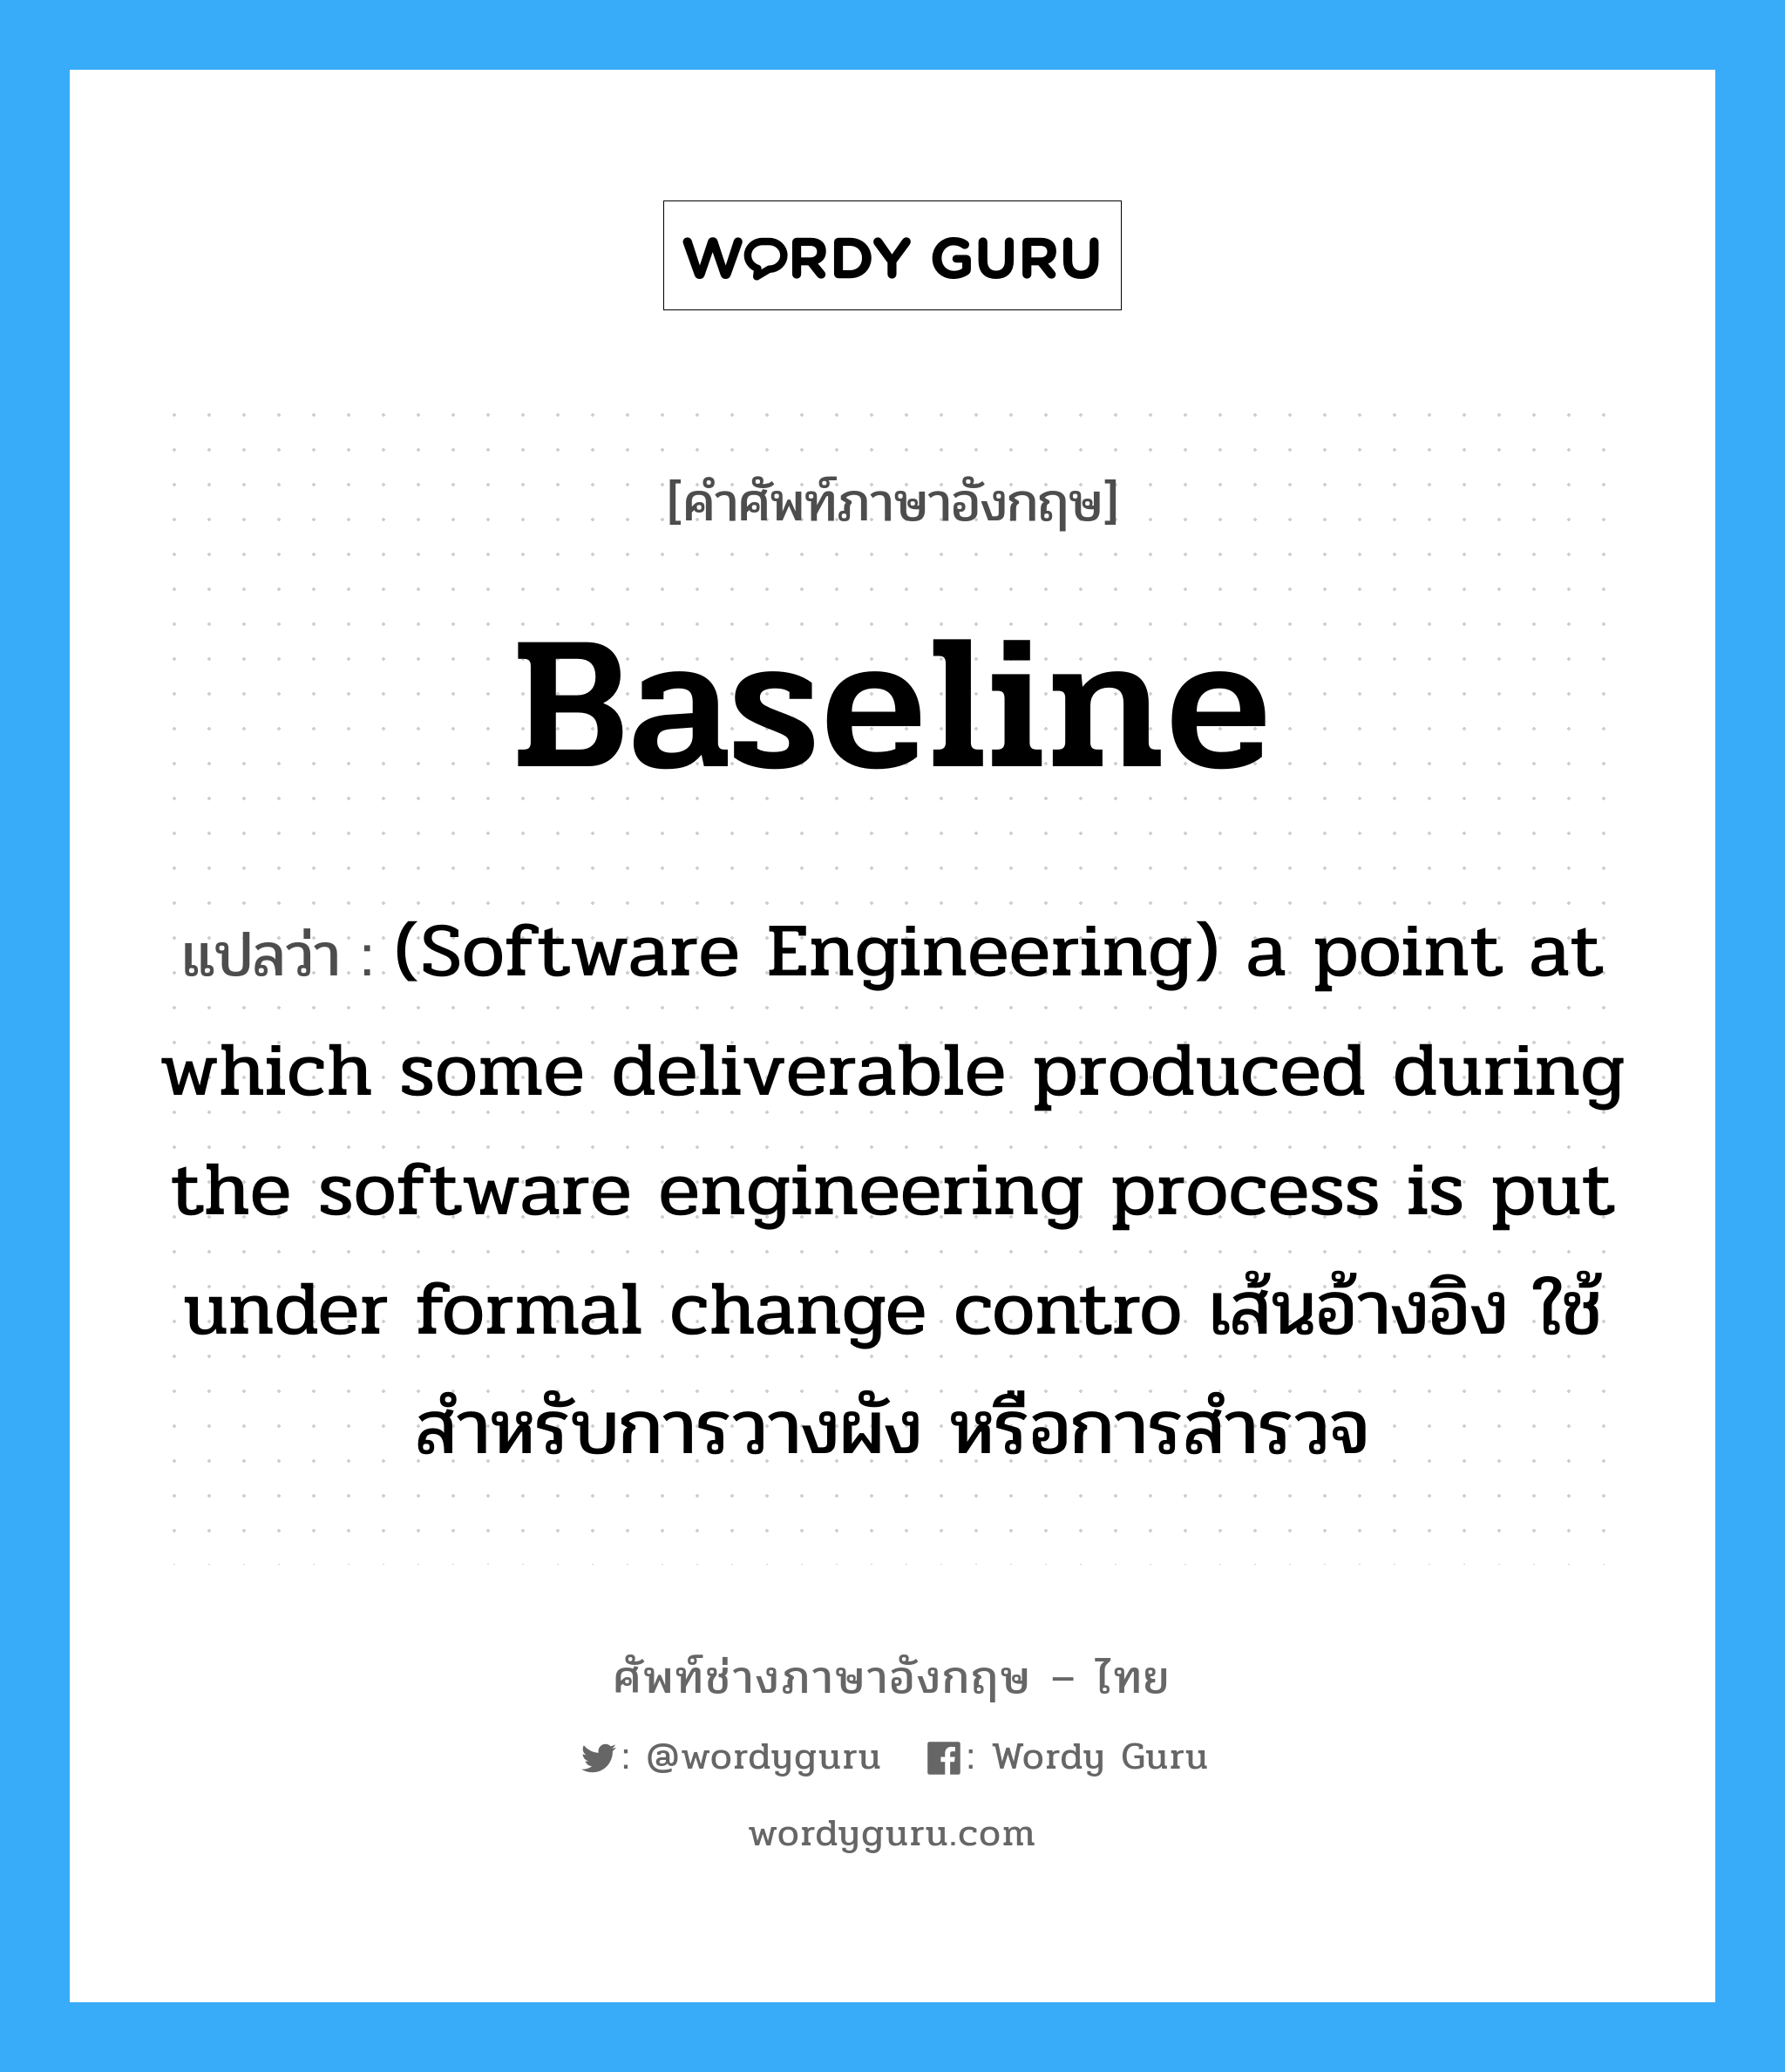 Baseline แปลว่า?, คำศัพท์ช่างภาษาอังกฤษ - ไทย Baseline คำศัพท์ภาษาอังกฤษ Baseline แปลว่า (Software Engineering) a point at which some deliverable produced during the software engineering process is put under formal change contro เส้นอ้างอิง ใช้สำหรับการวางผัง หรือการสำรวจ